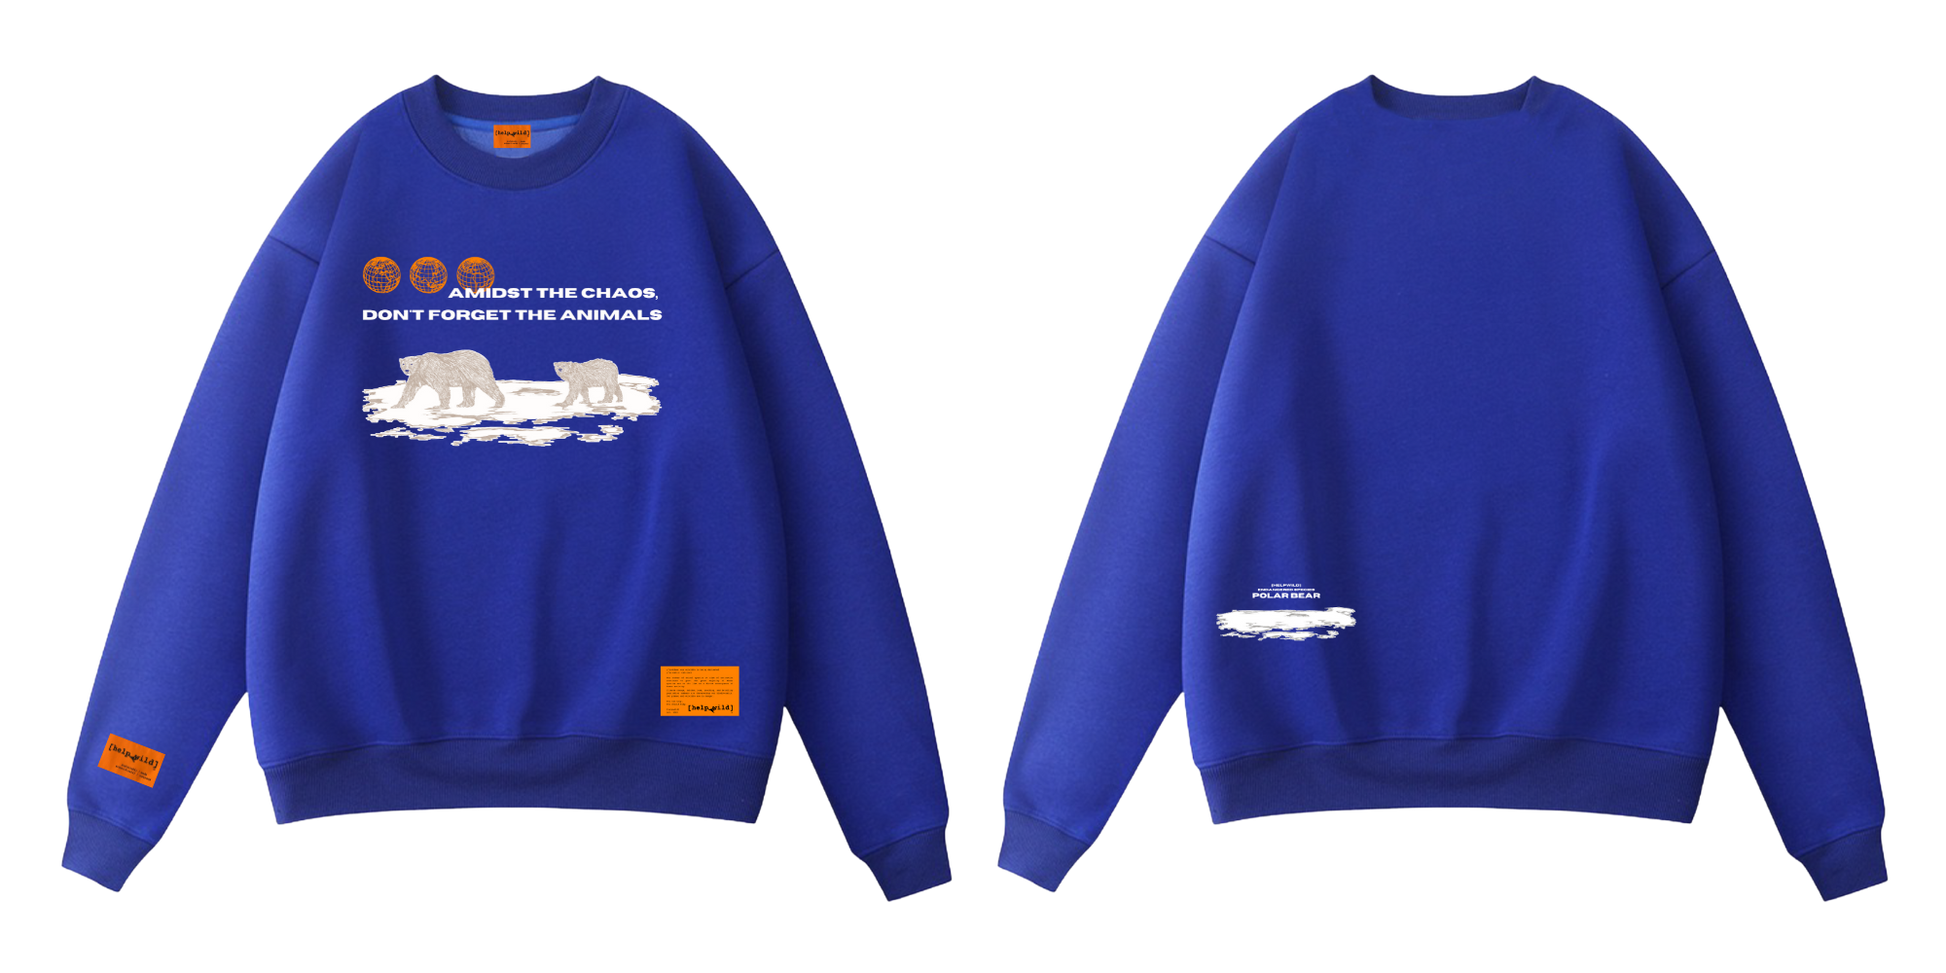 Polar Bear Endangered Species sweater or sweatshirt made of organic cotton in the streetwear style with the phrase Amidst The Chaos Don't Forget The Animals